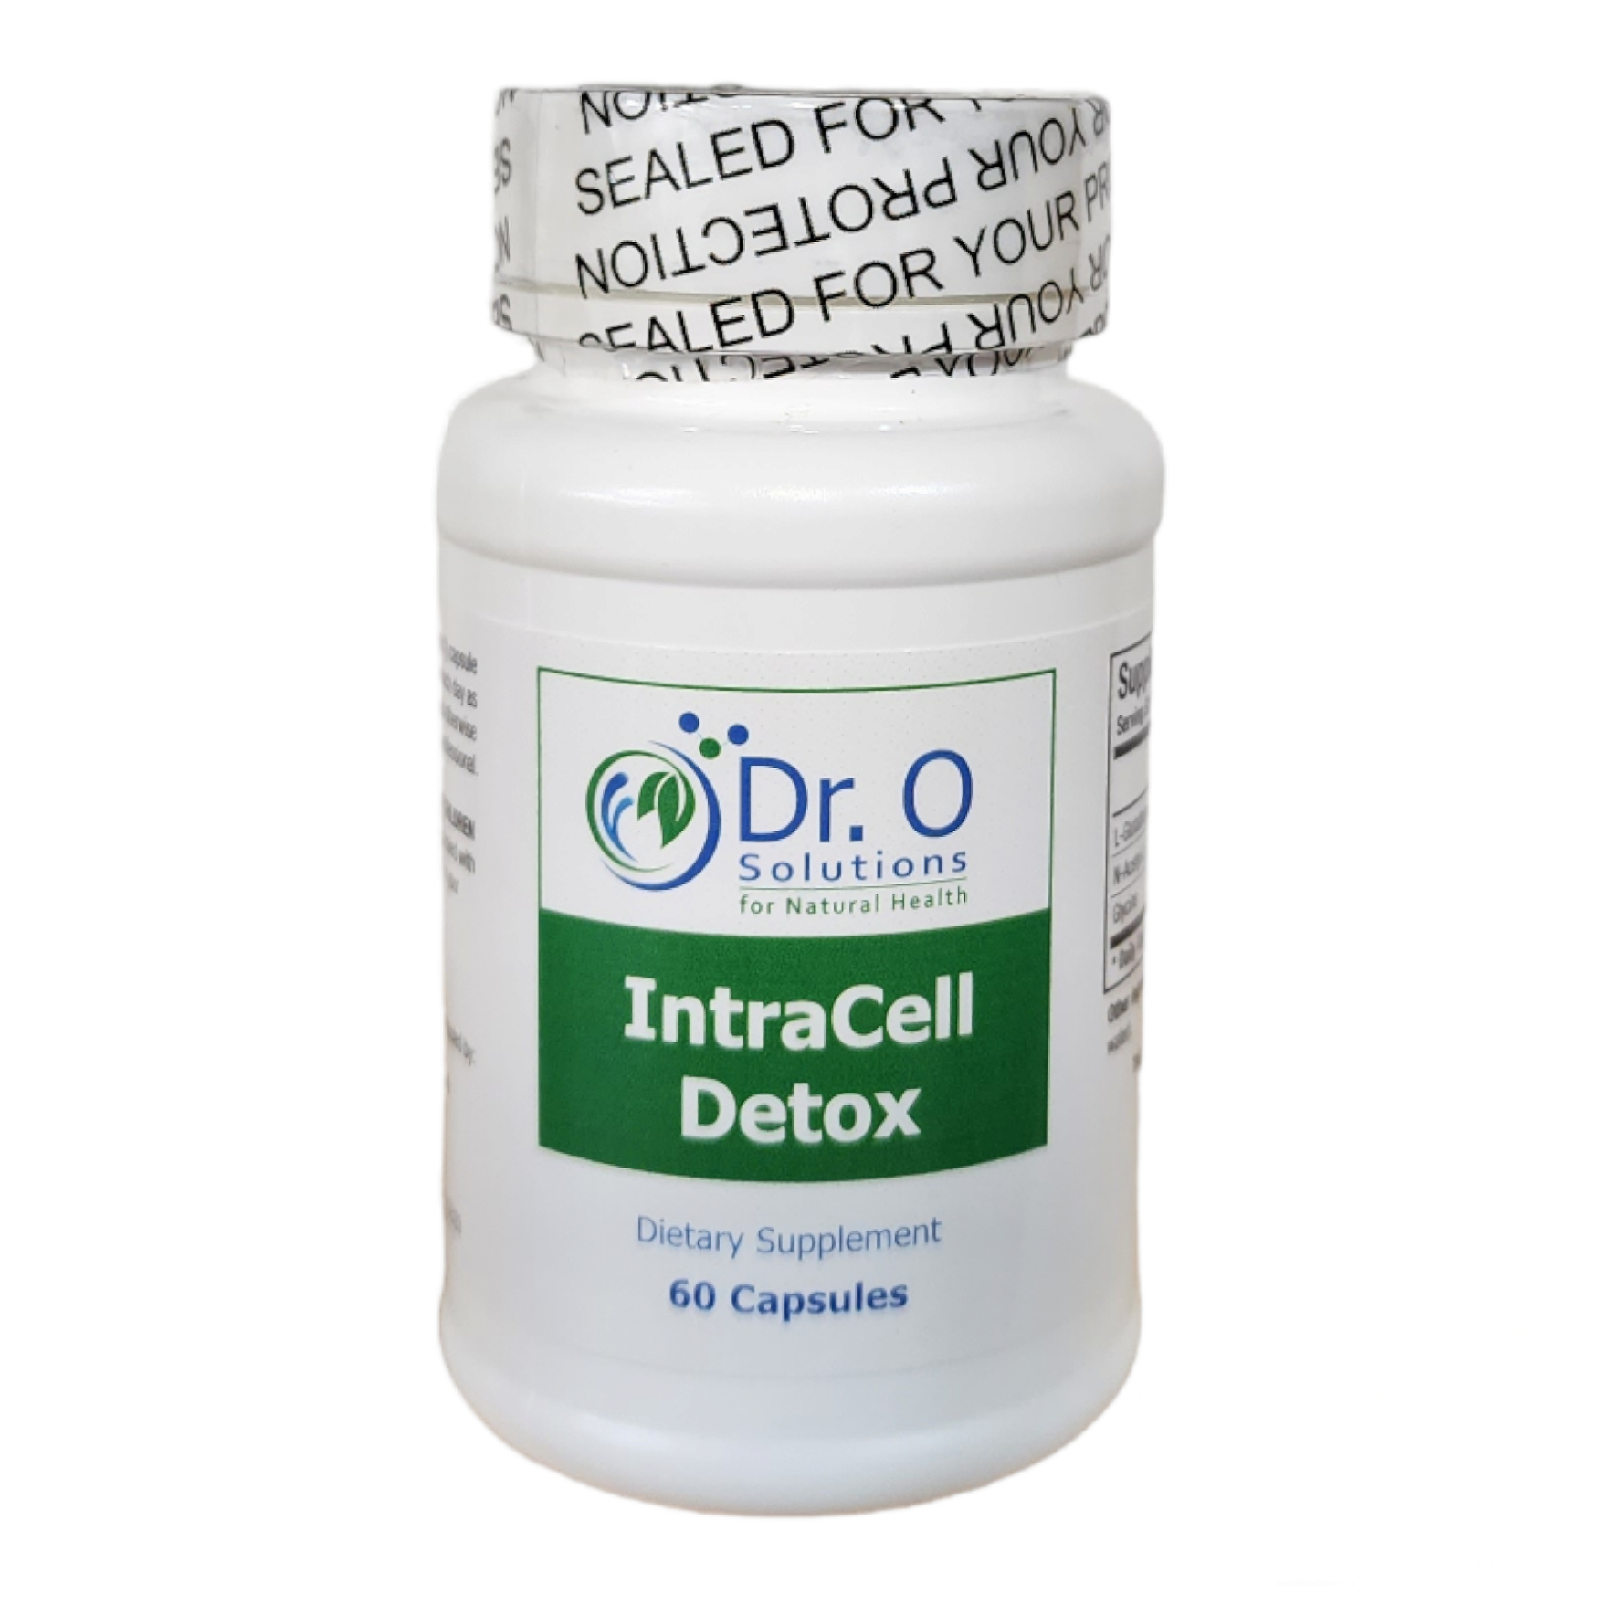 IntraCell Detox